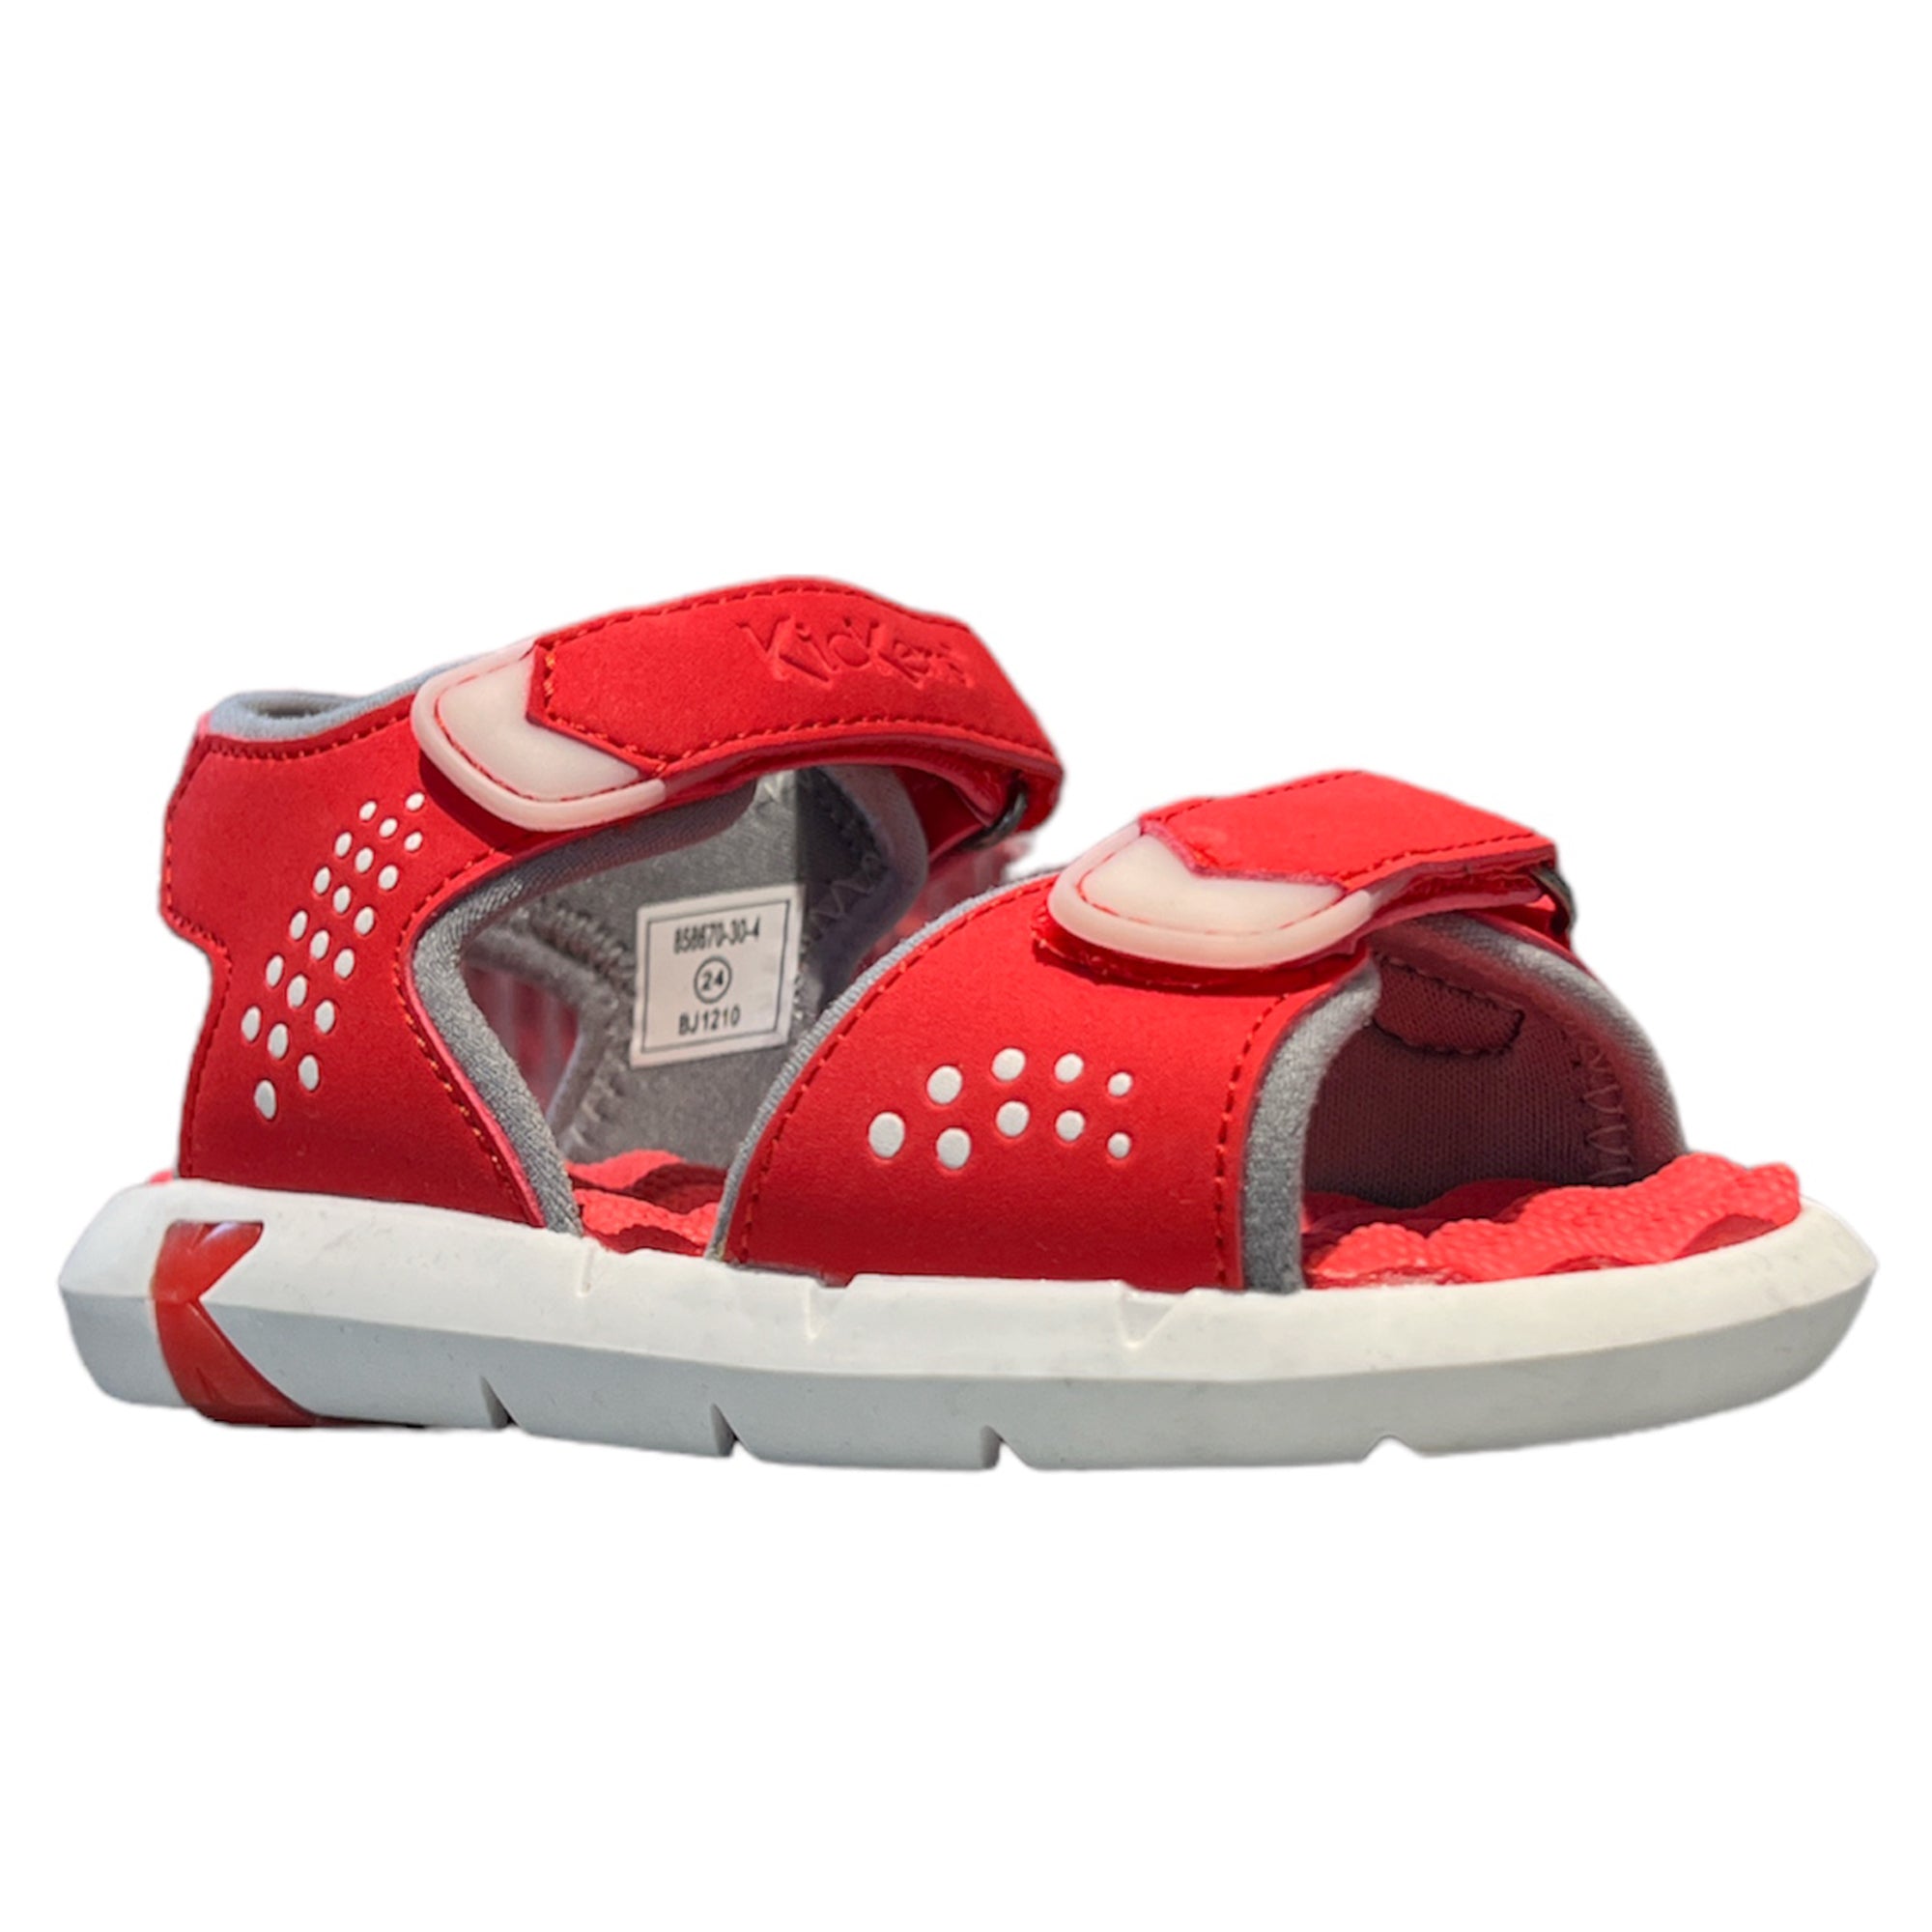 Kickers Red Sandals